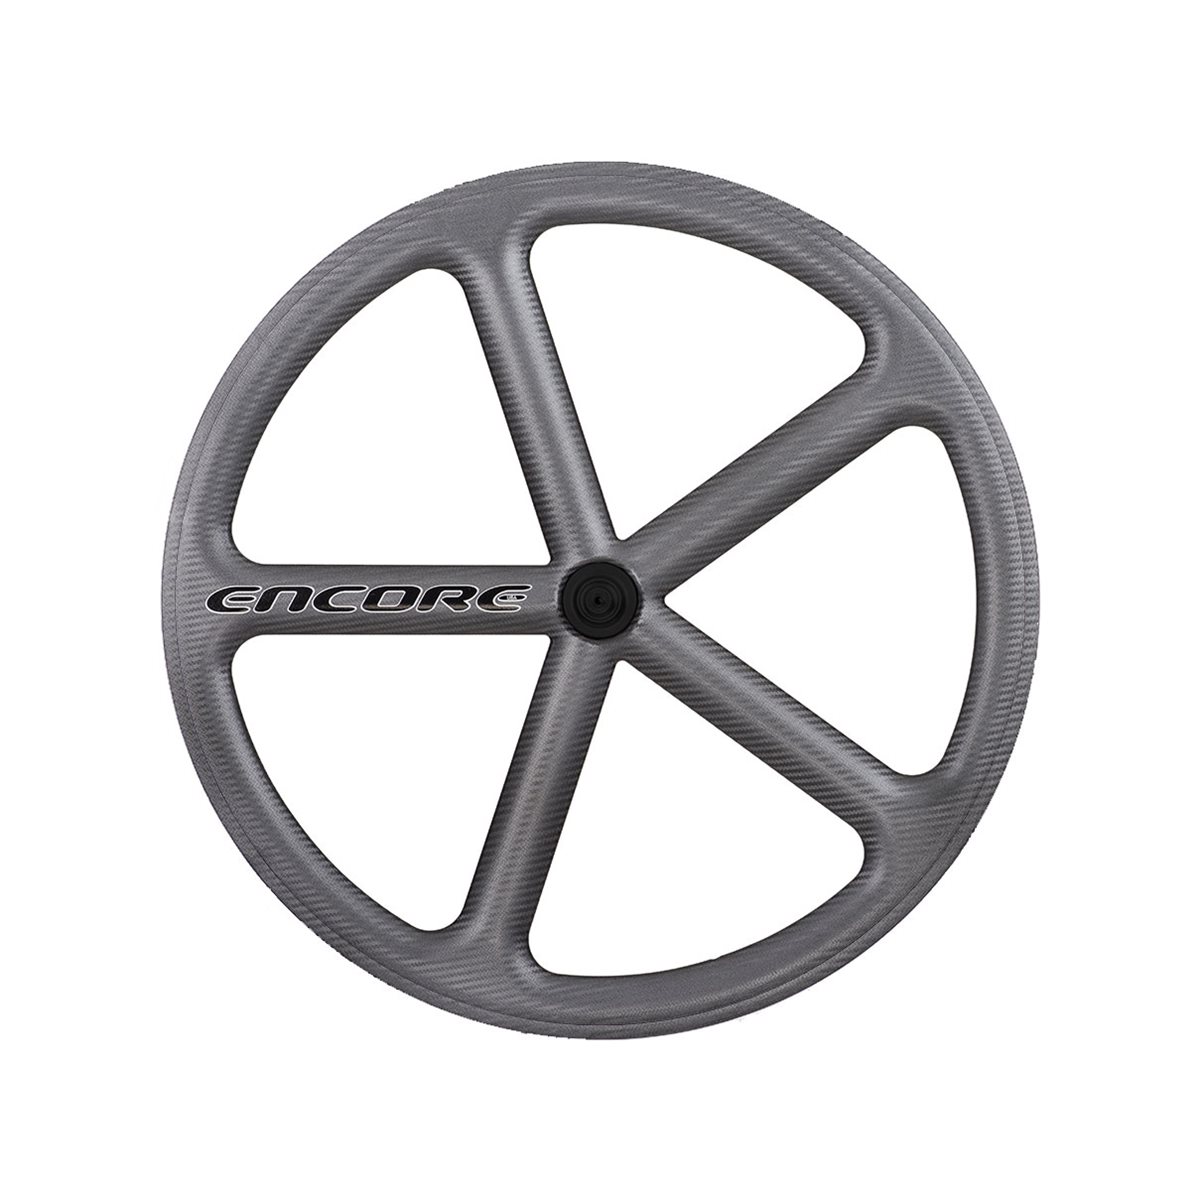 rear wheel 700c track 5 spokes carbon weave charcoal nmsw